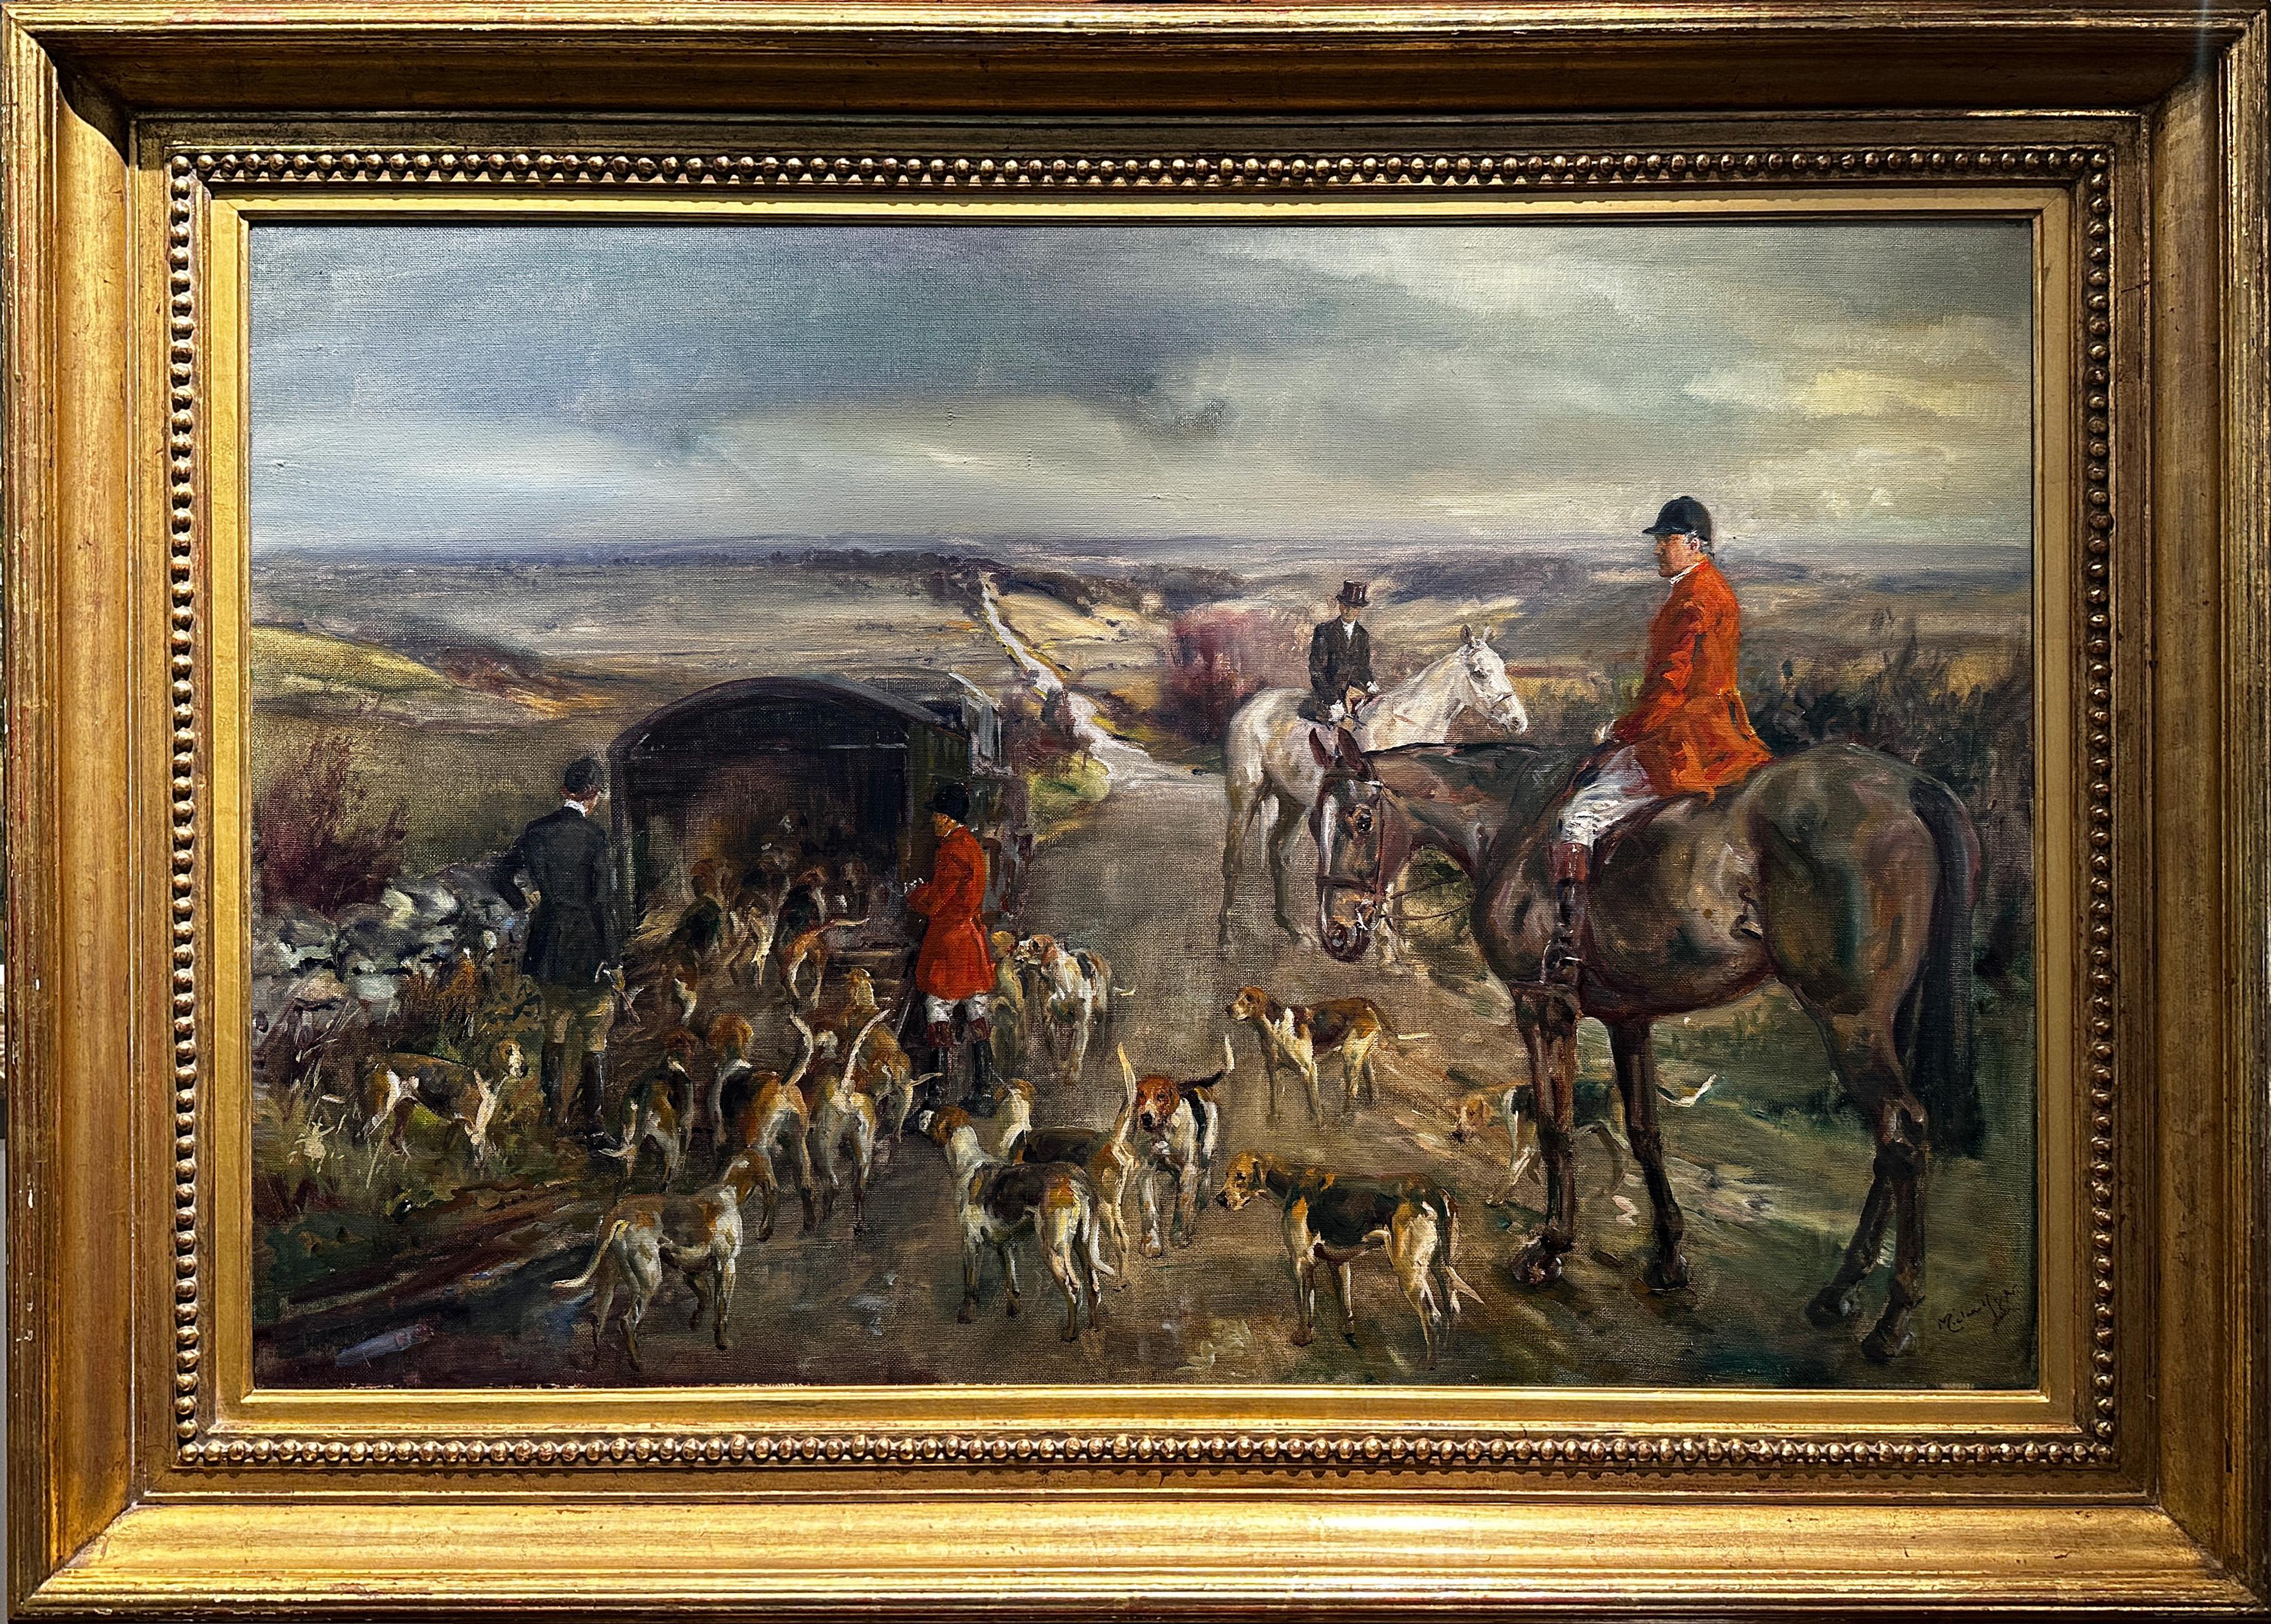 Michael Lyne Landscape Painting - 'Mendip Hunt' English Countryside painting of horses, hounds, huntsmen, green